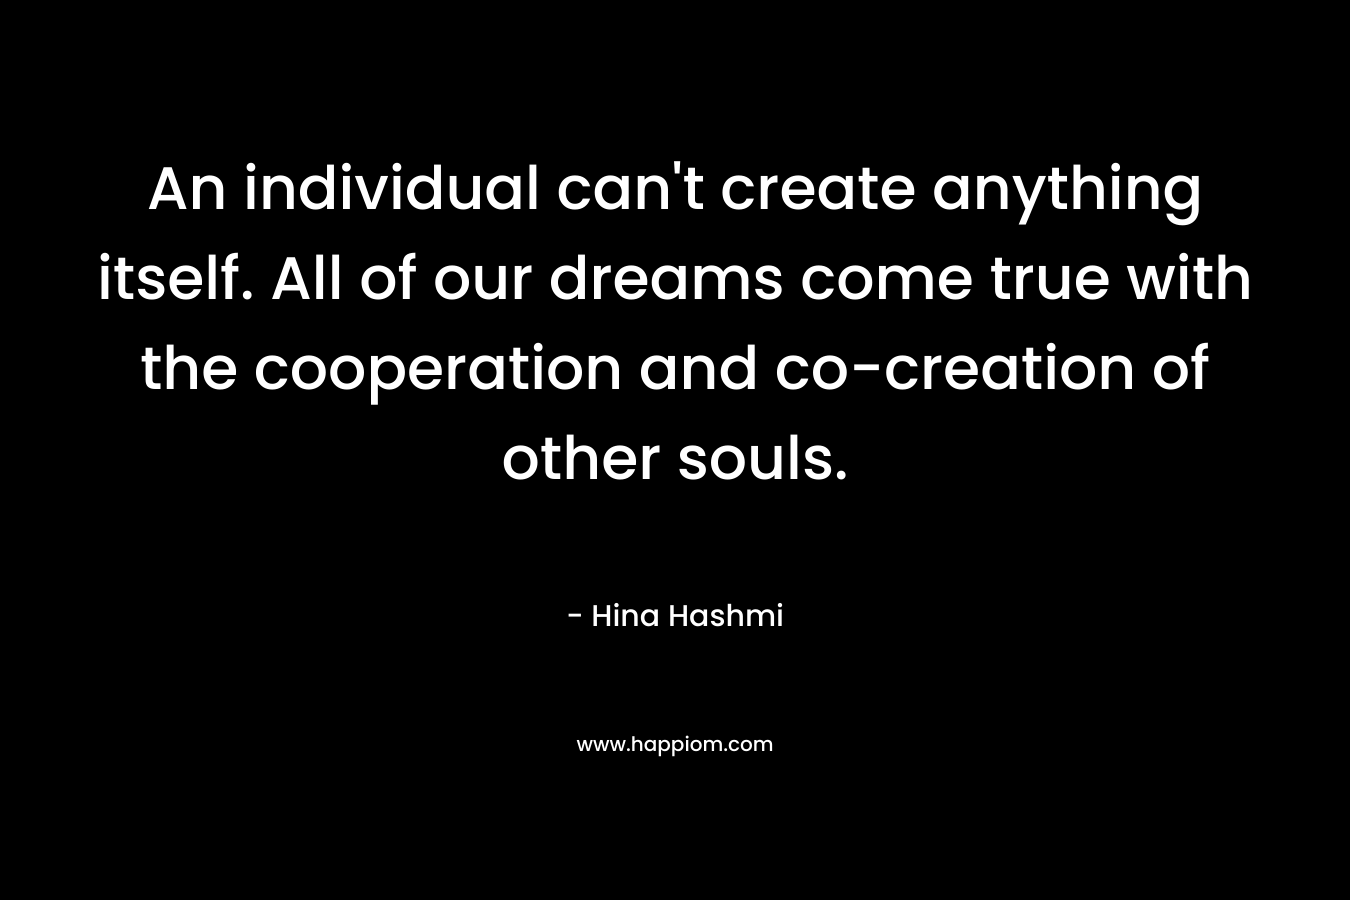 An individual can't create anything itself. All of our dreams come true with the cooperation and co-creation of other souls.